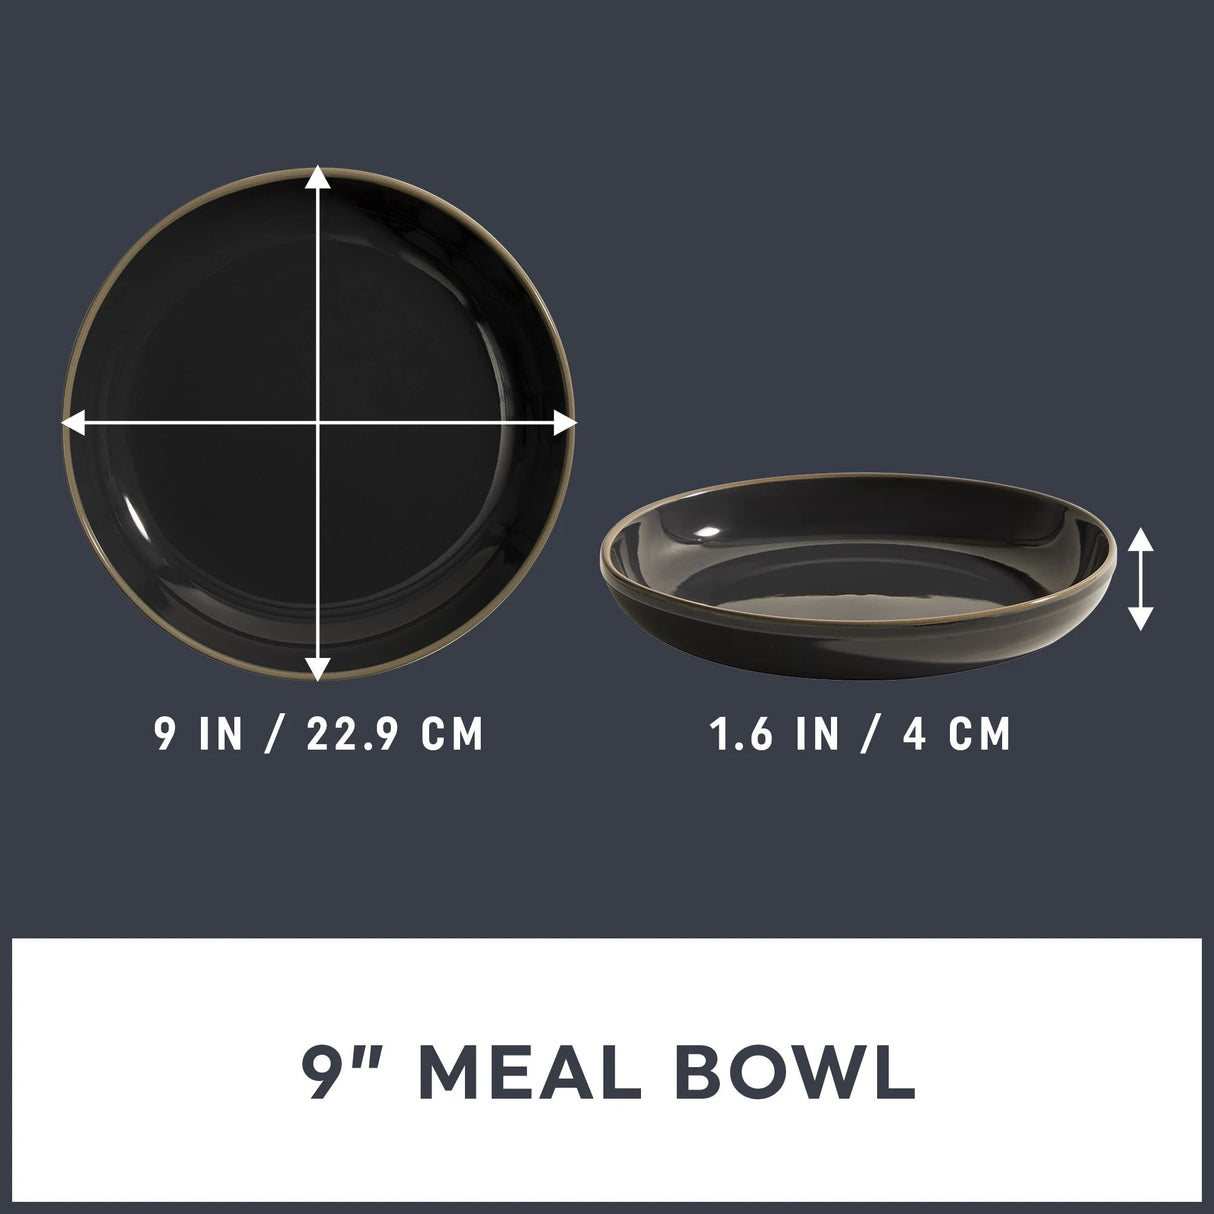  Stoneware 9" Meal Bowl, Peppercorn with dimensions shown on the photo